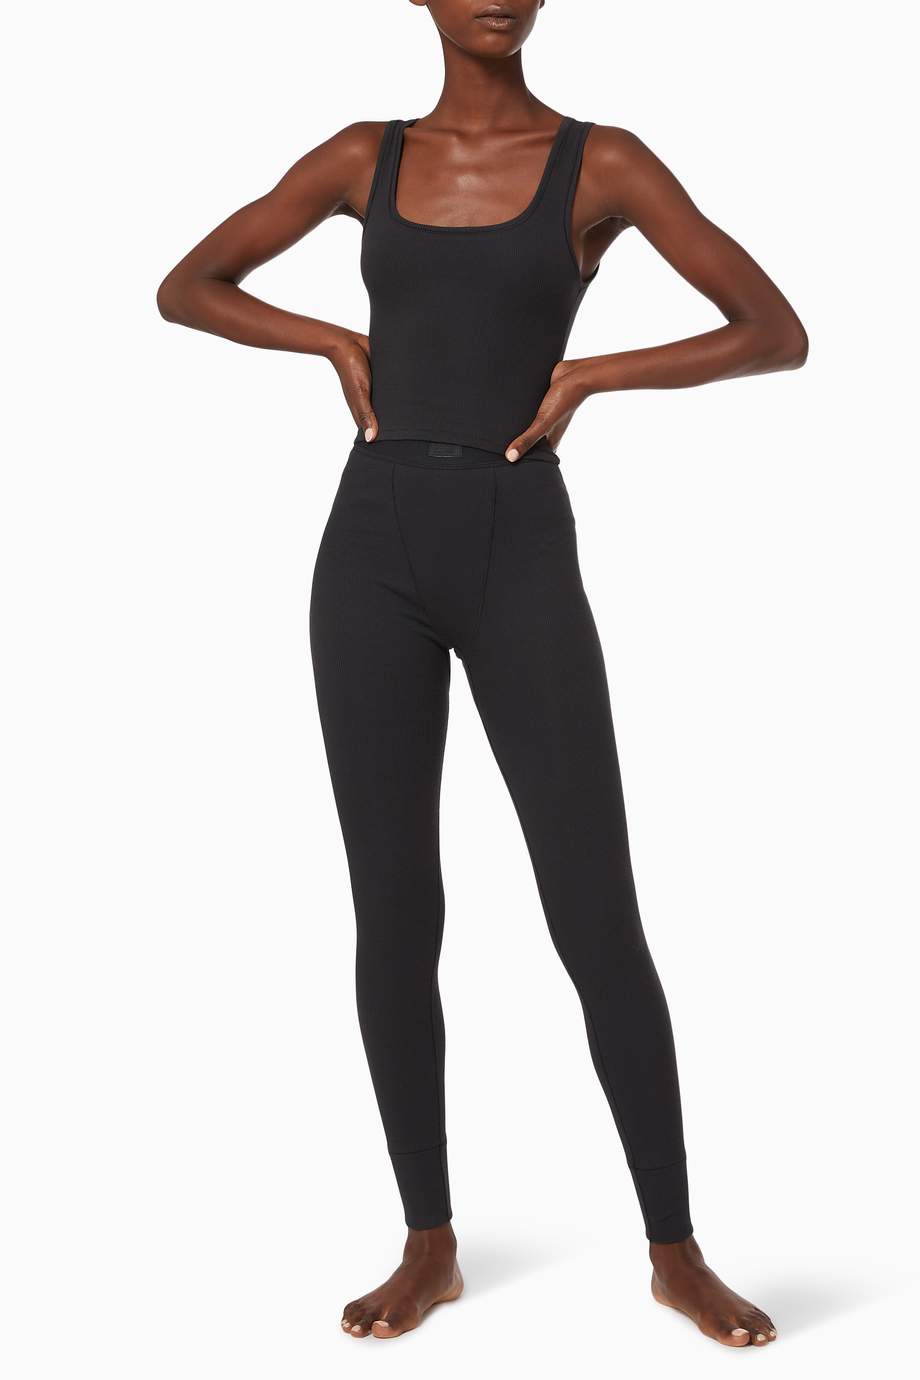 Xinyou Clothing - Women's Breathable & Thin, High Waisted Sports